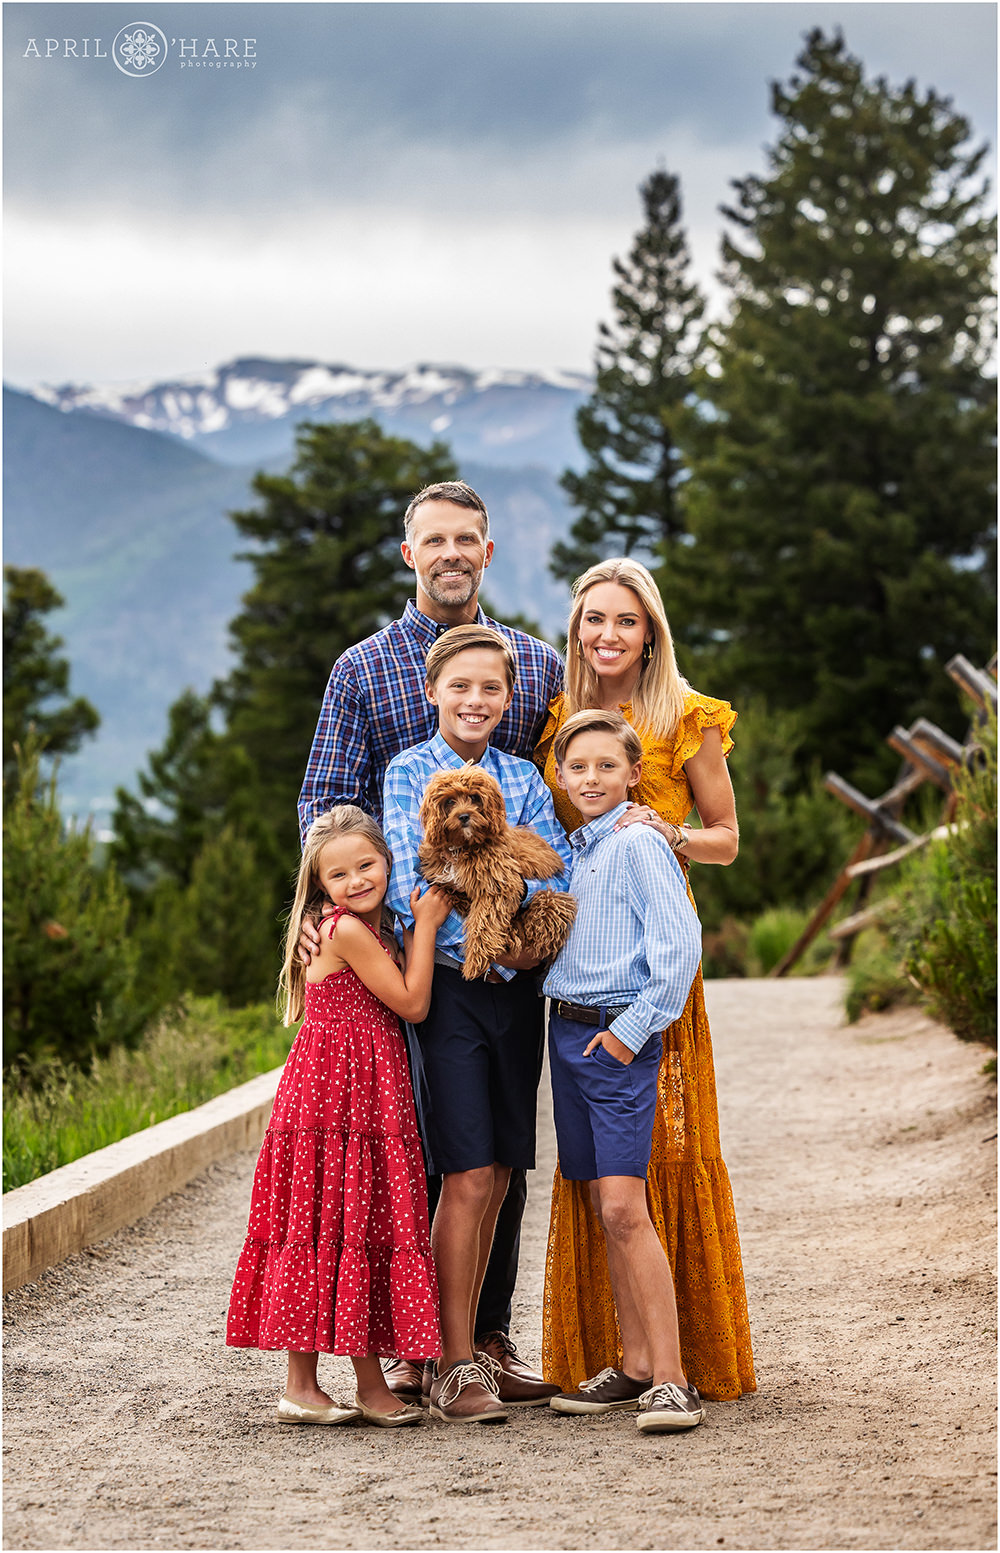 Adorable family photo in the mountains of Colorado at Sapphire Point near Frisco